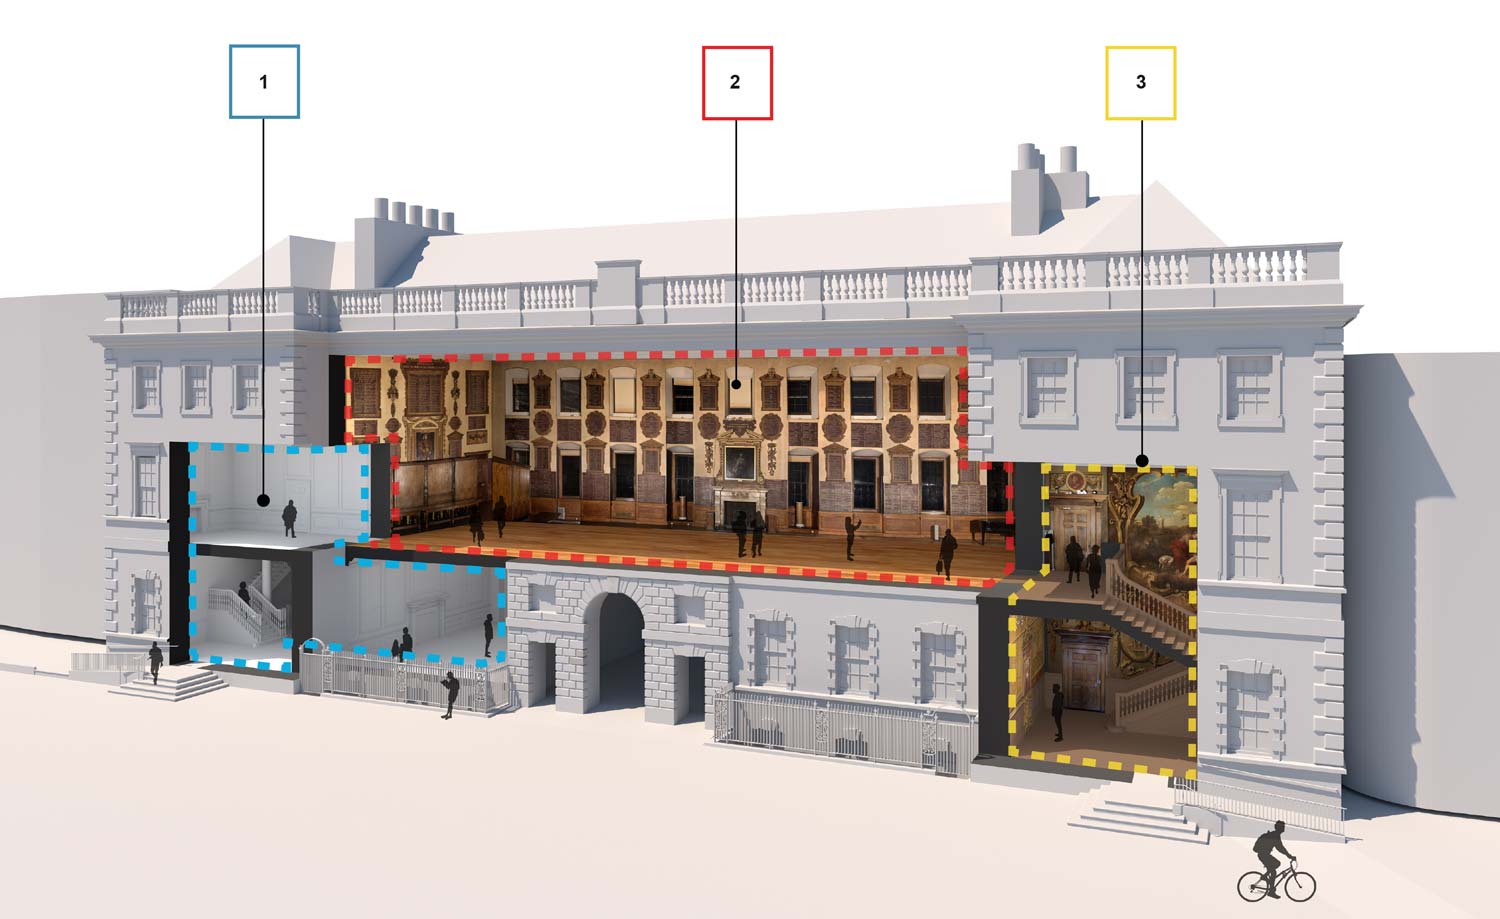 Cutaway showing the interiors of the North Wing and their uses